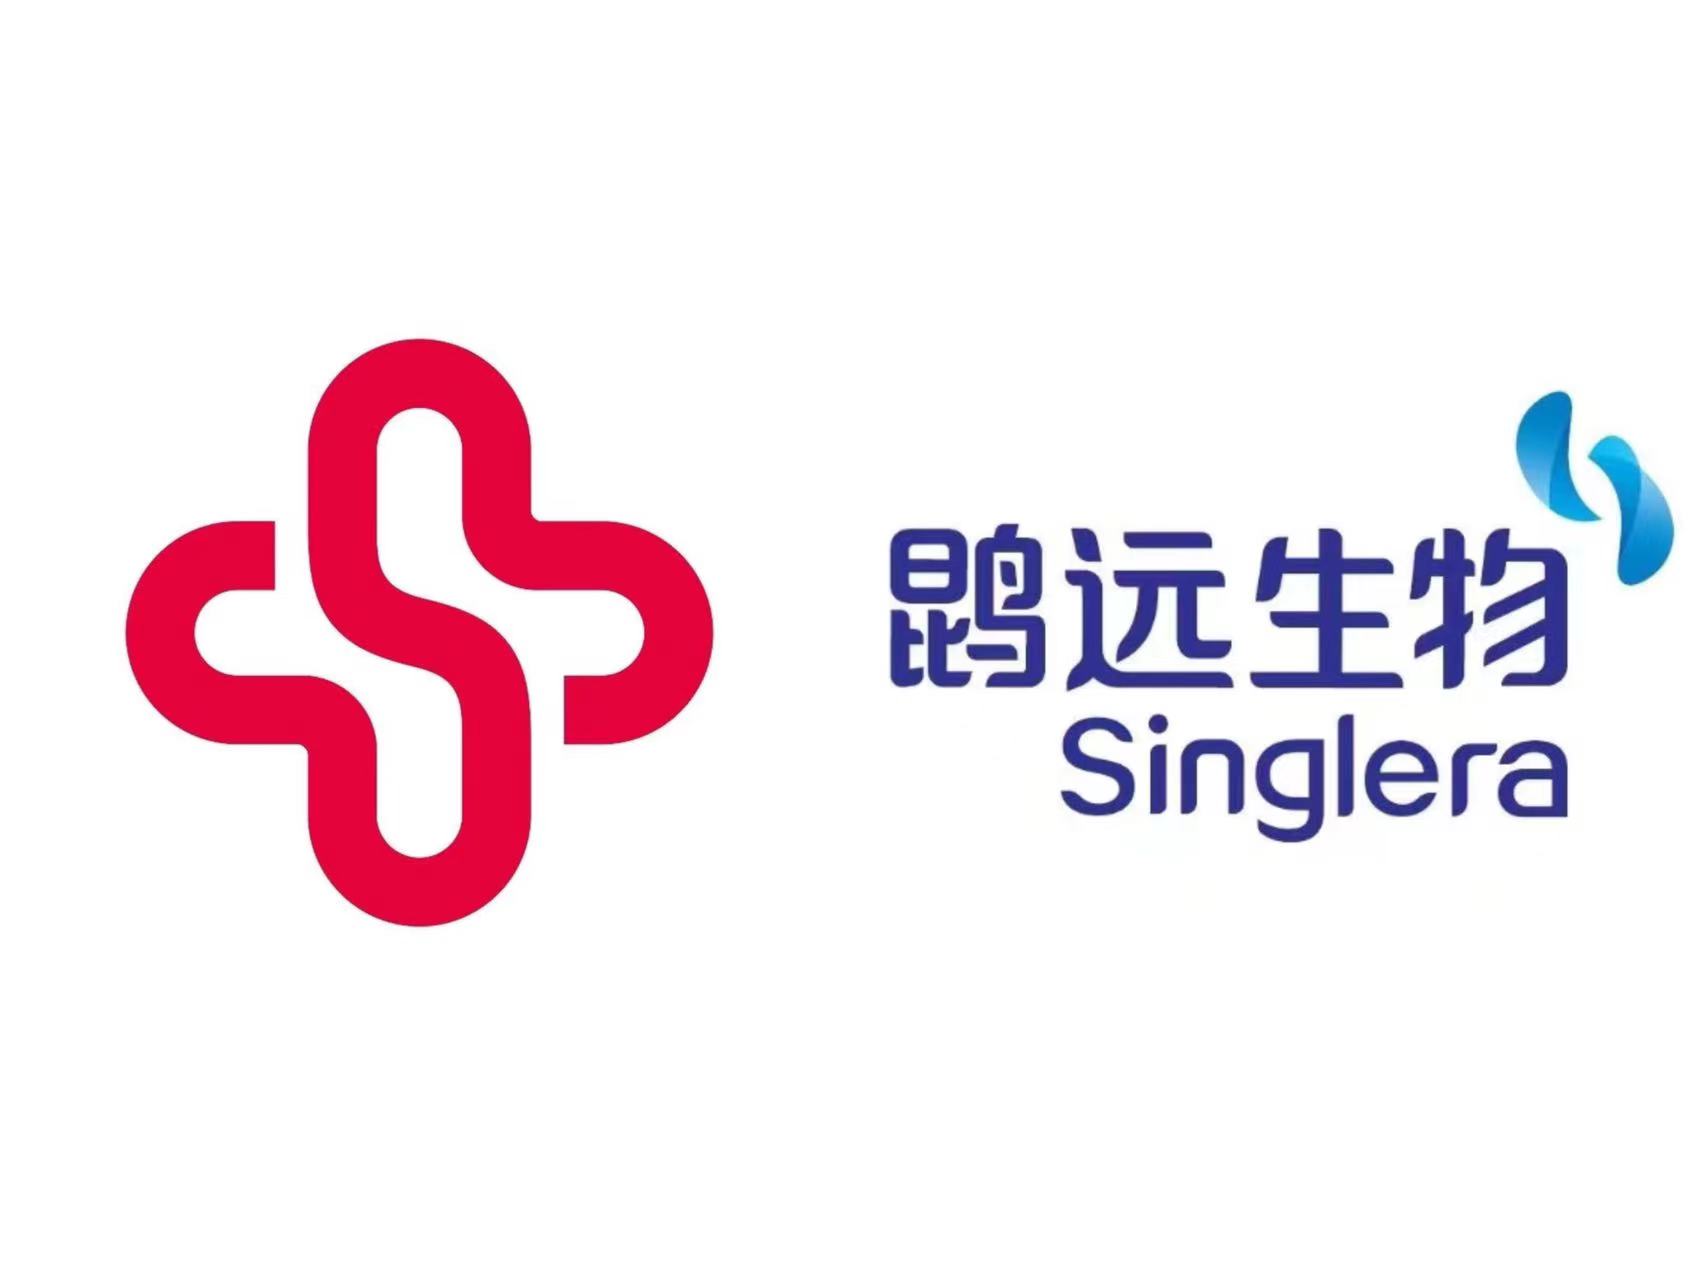 Sansure collaborated with Singlera to enter the 100 billion CNY tumor early-screening market!